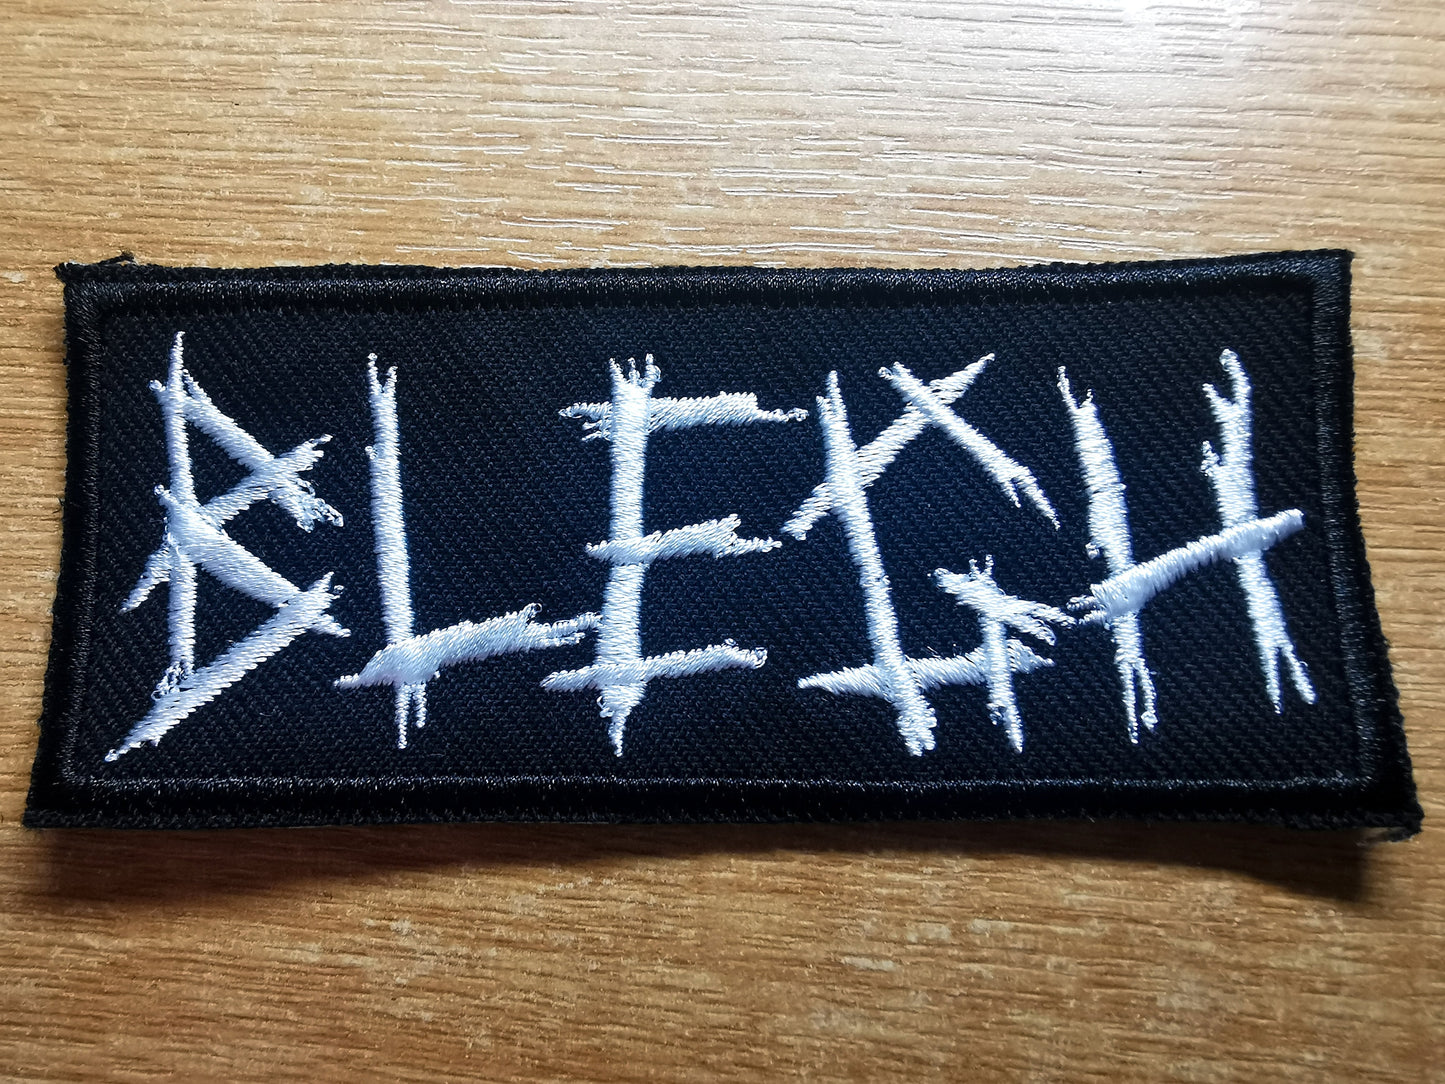 Blegh Metalcore Embroidered Patch Metal Breakdown Emo